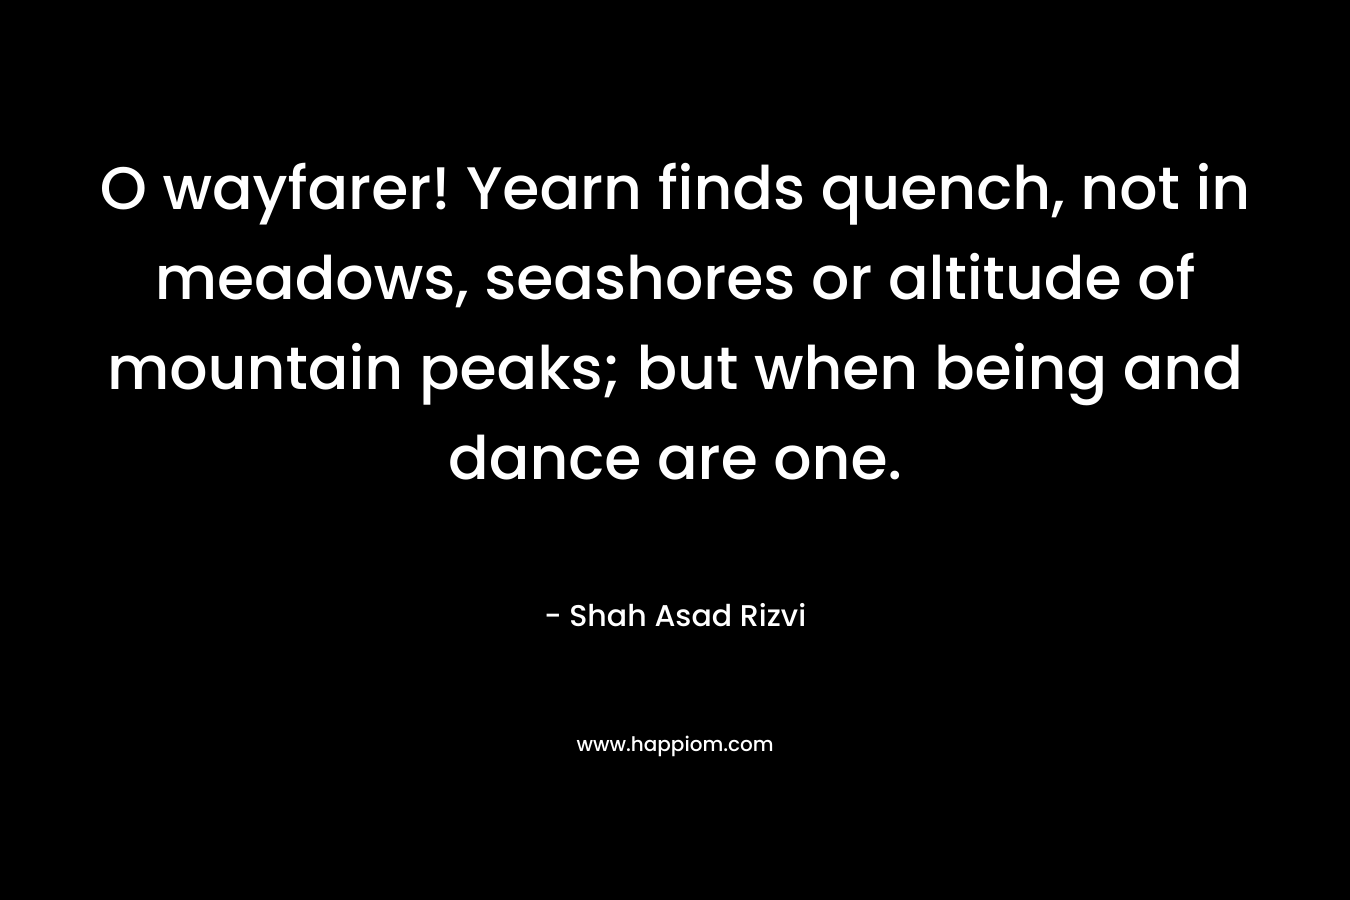 O wayfarer! Yearn finds quench, not in meadows, seashores or altitude of mountain peaks; but when being and dance are one.